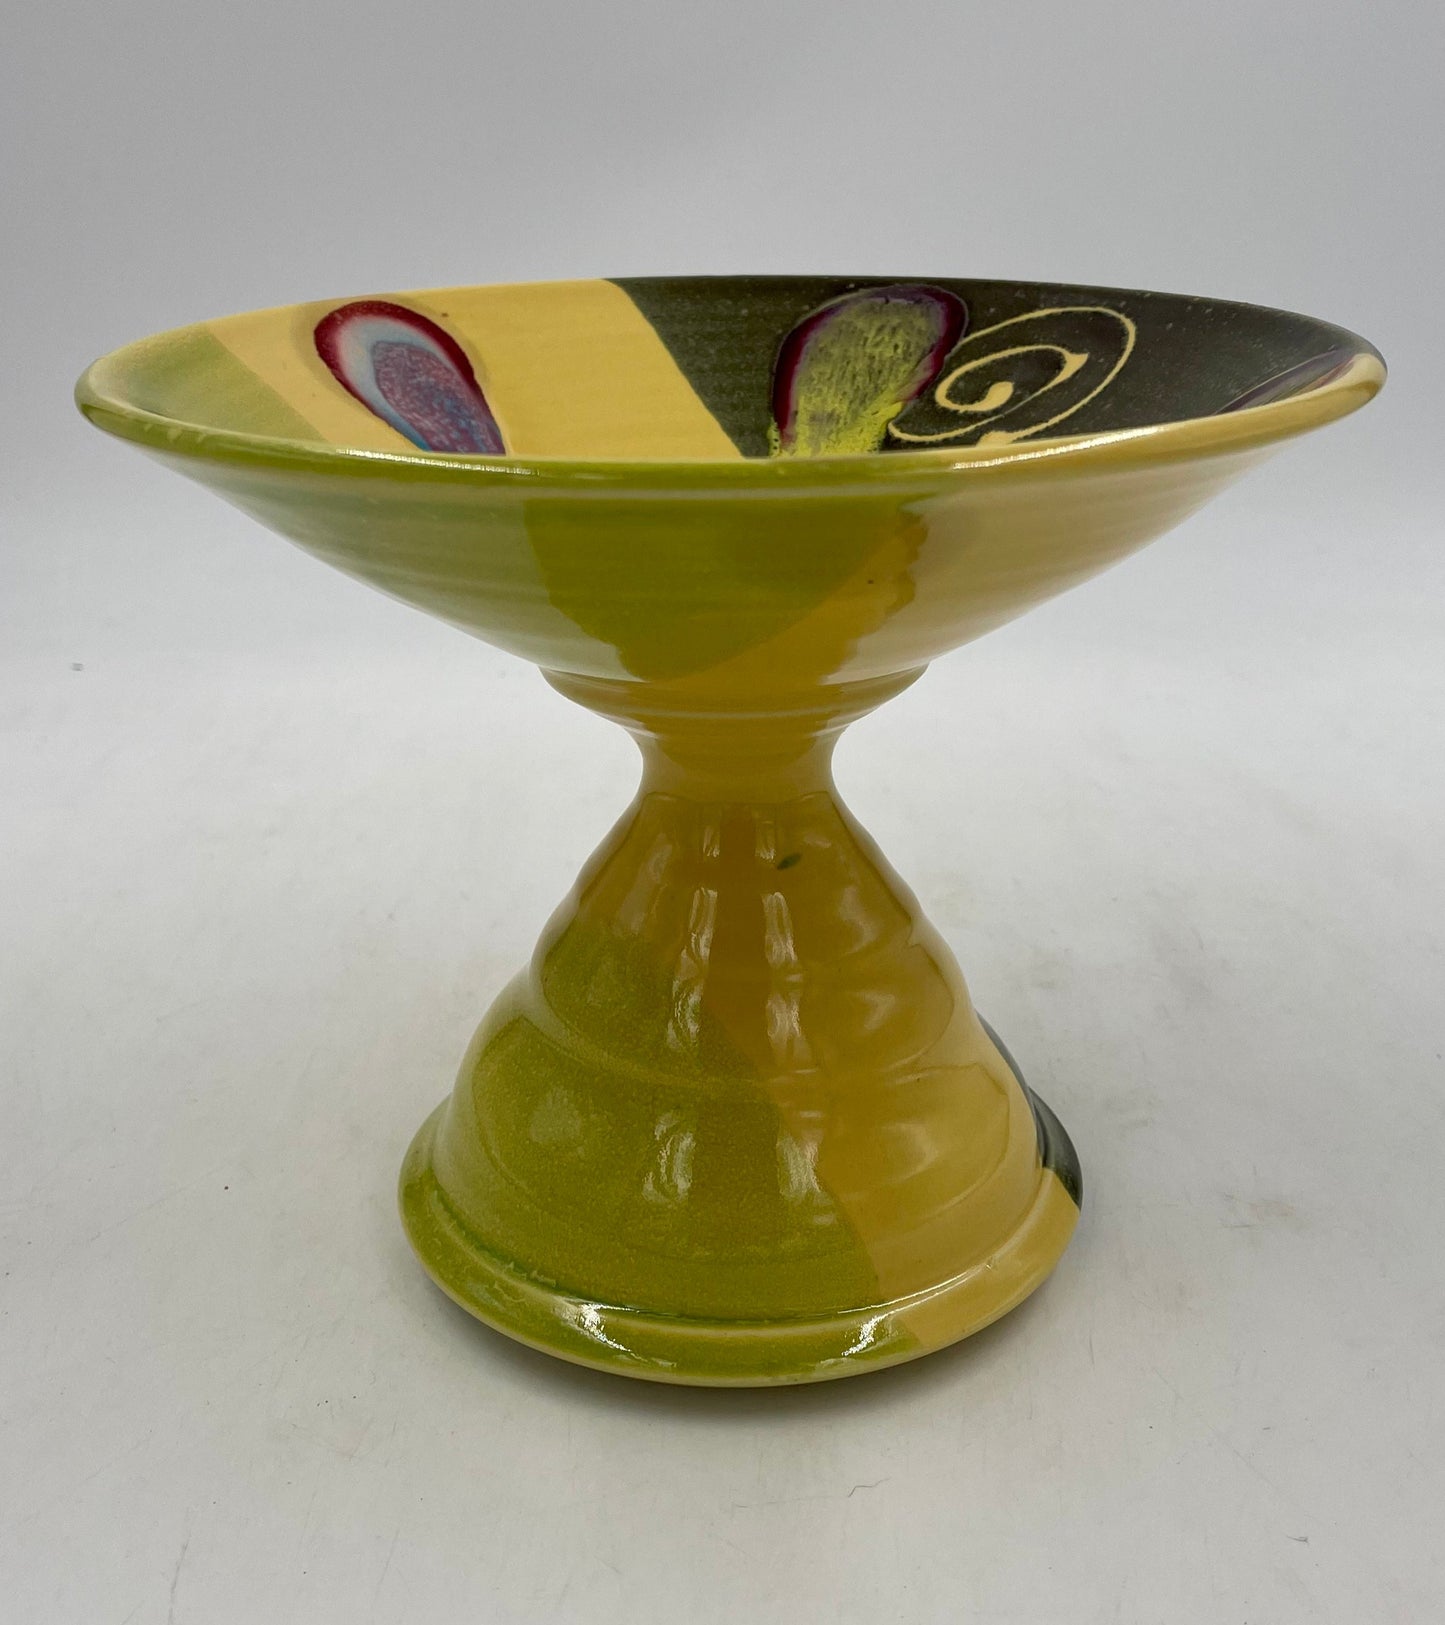 Teal Conical Bowl